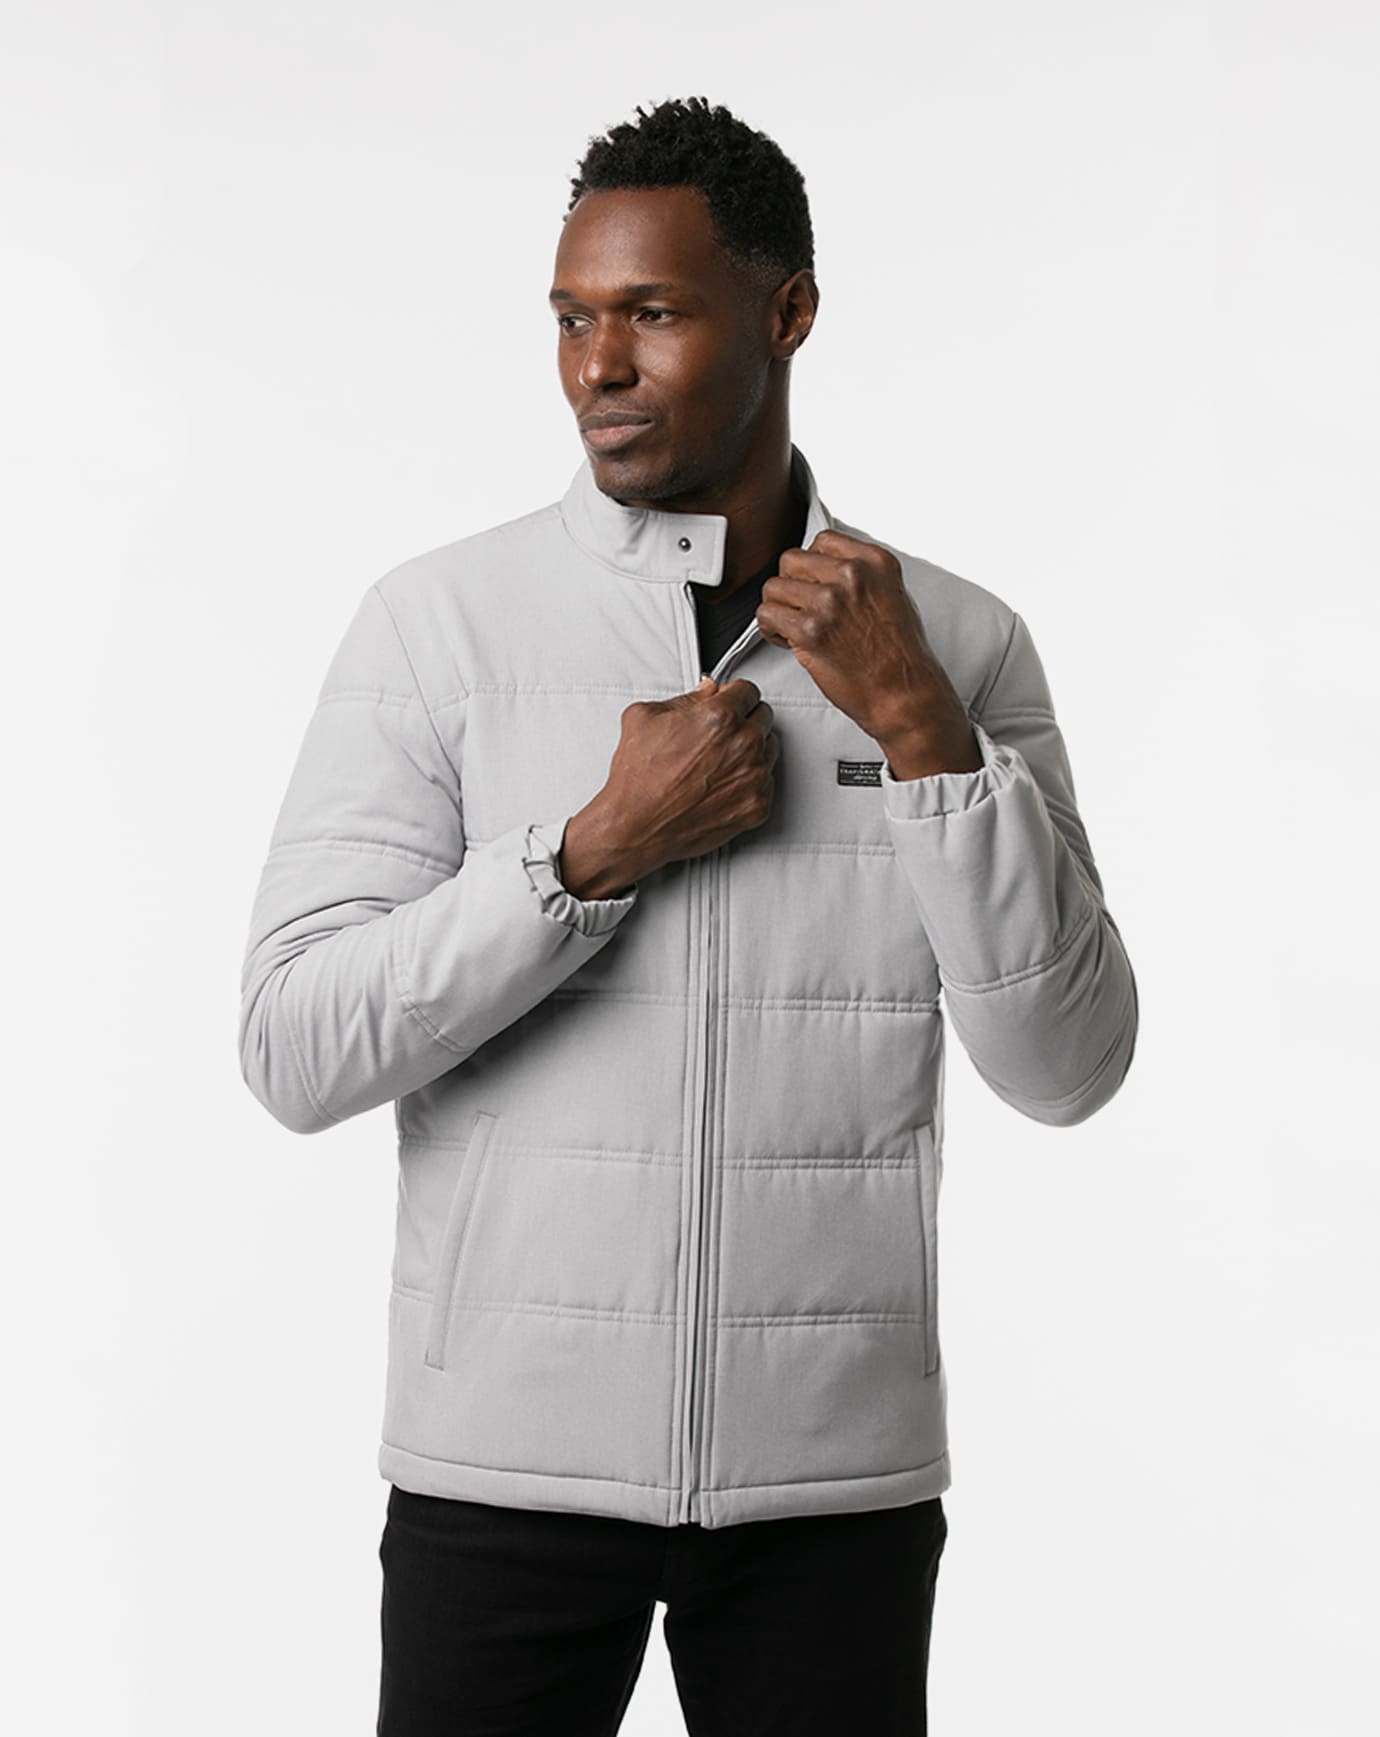 Related Product - INTERLUDE PUFFER JACKET